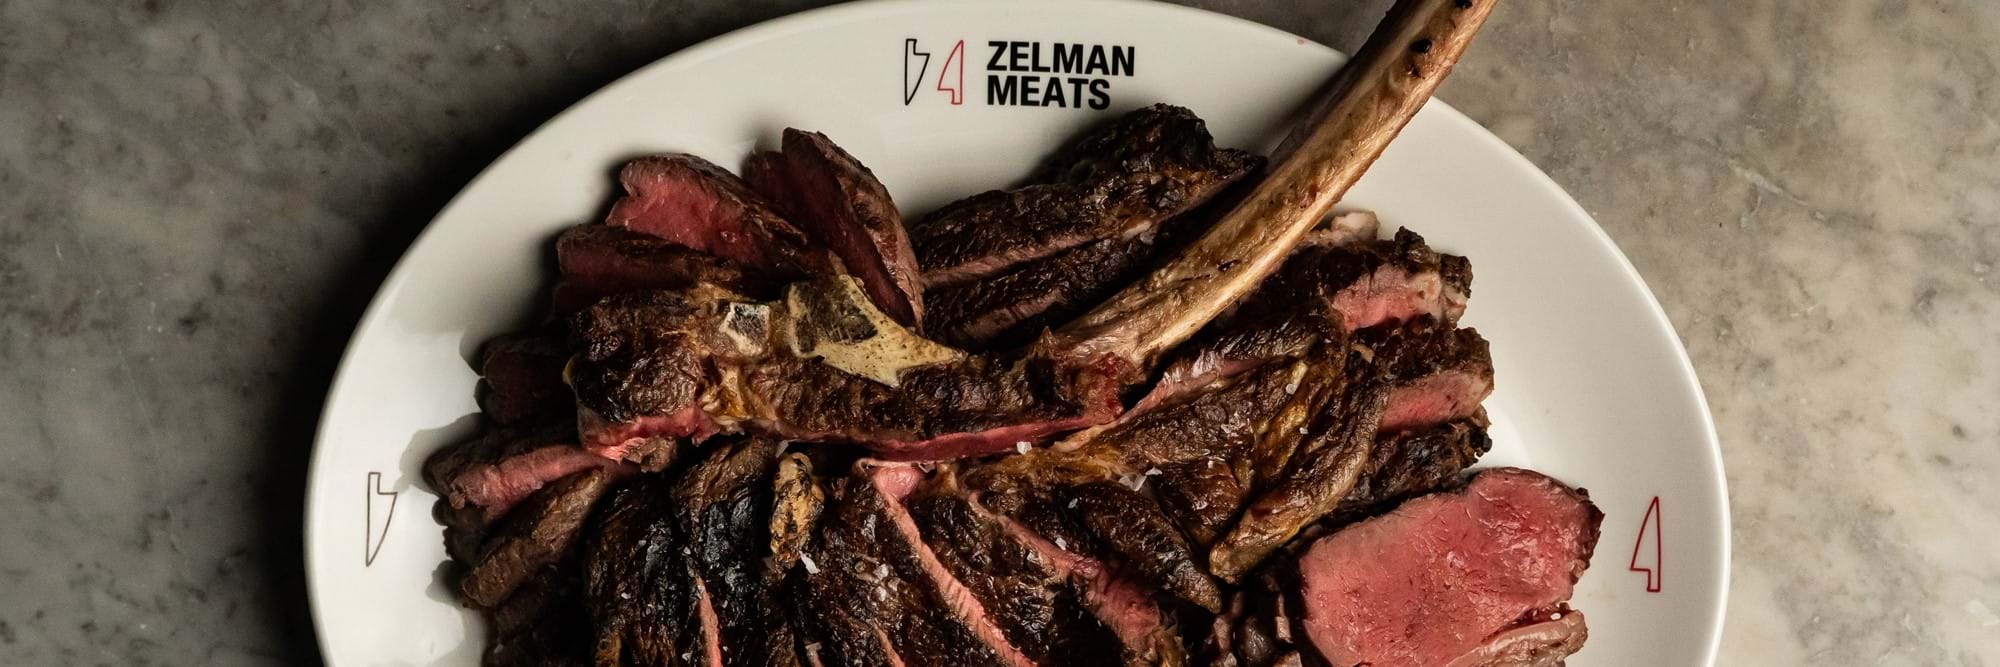 Large plate of meat at Zelman Meats restaurant in London